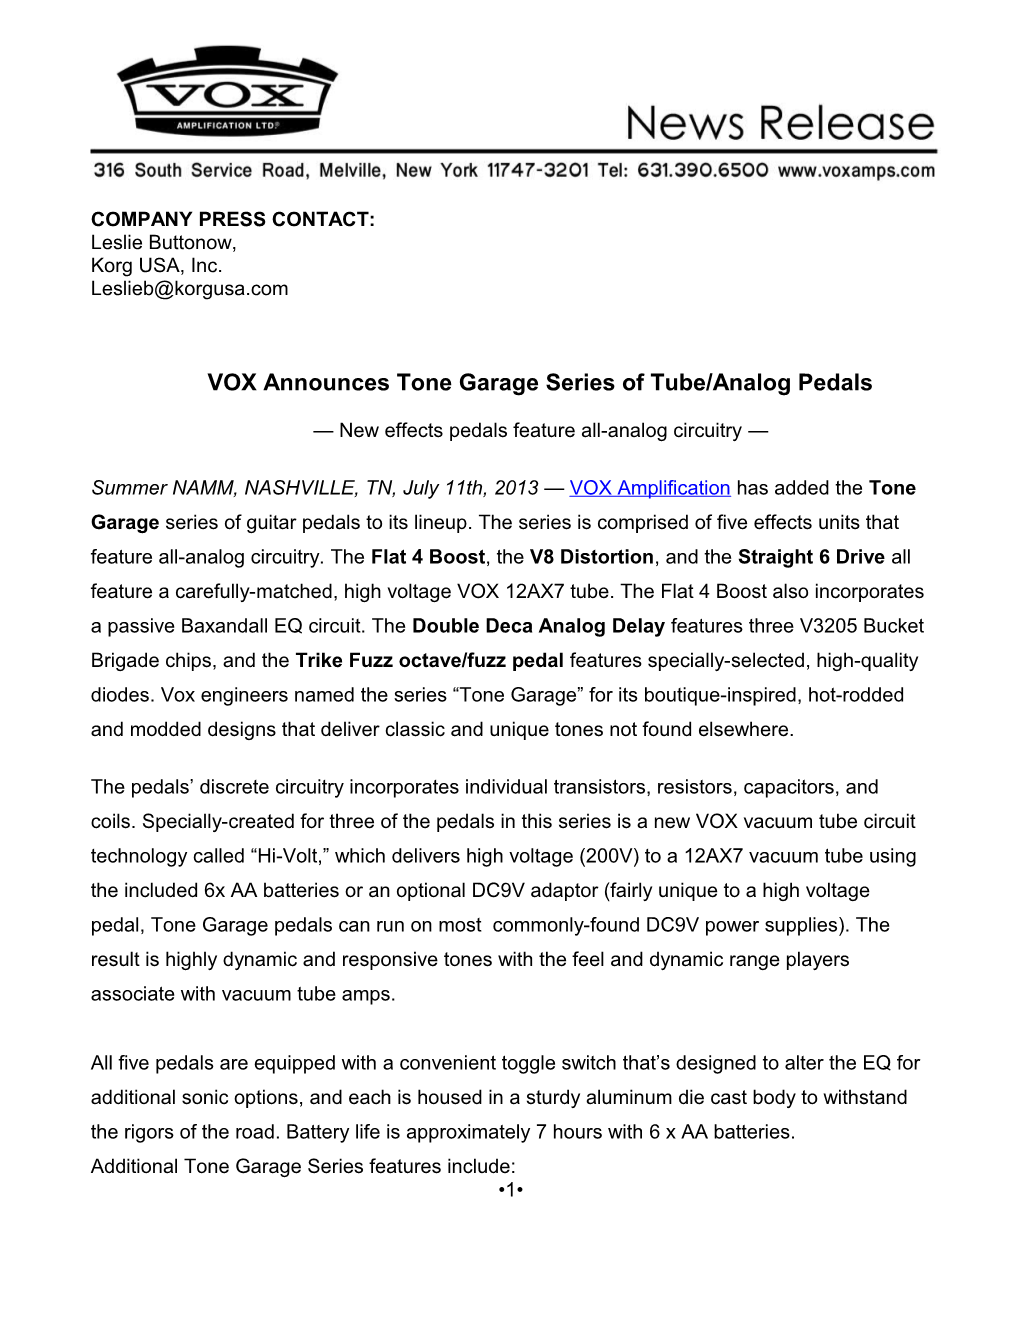 VOX Announces Tone Garage Series of Tube/Analog Pedals